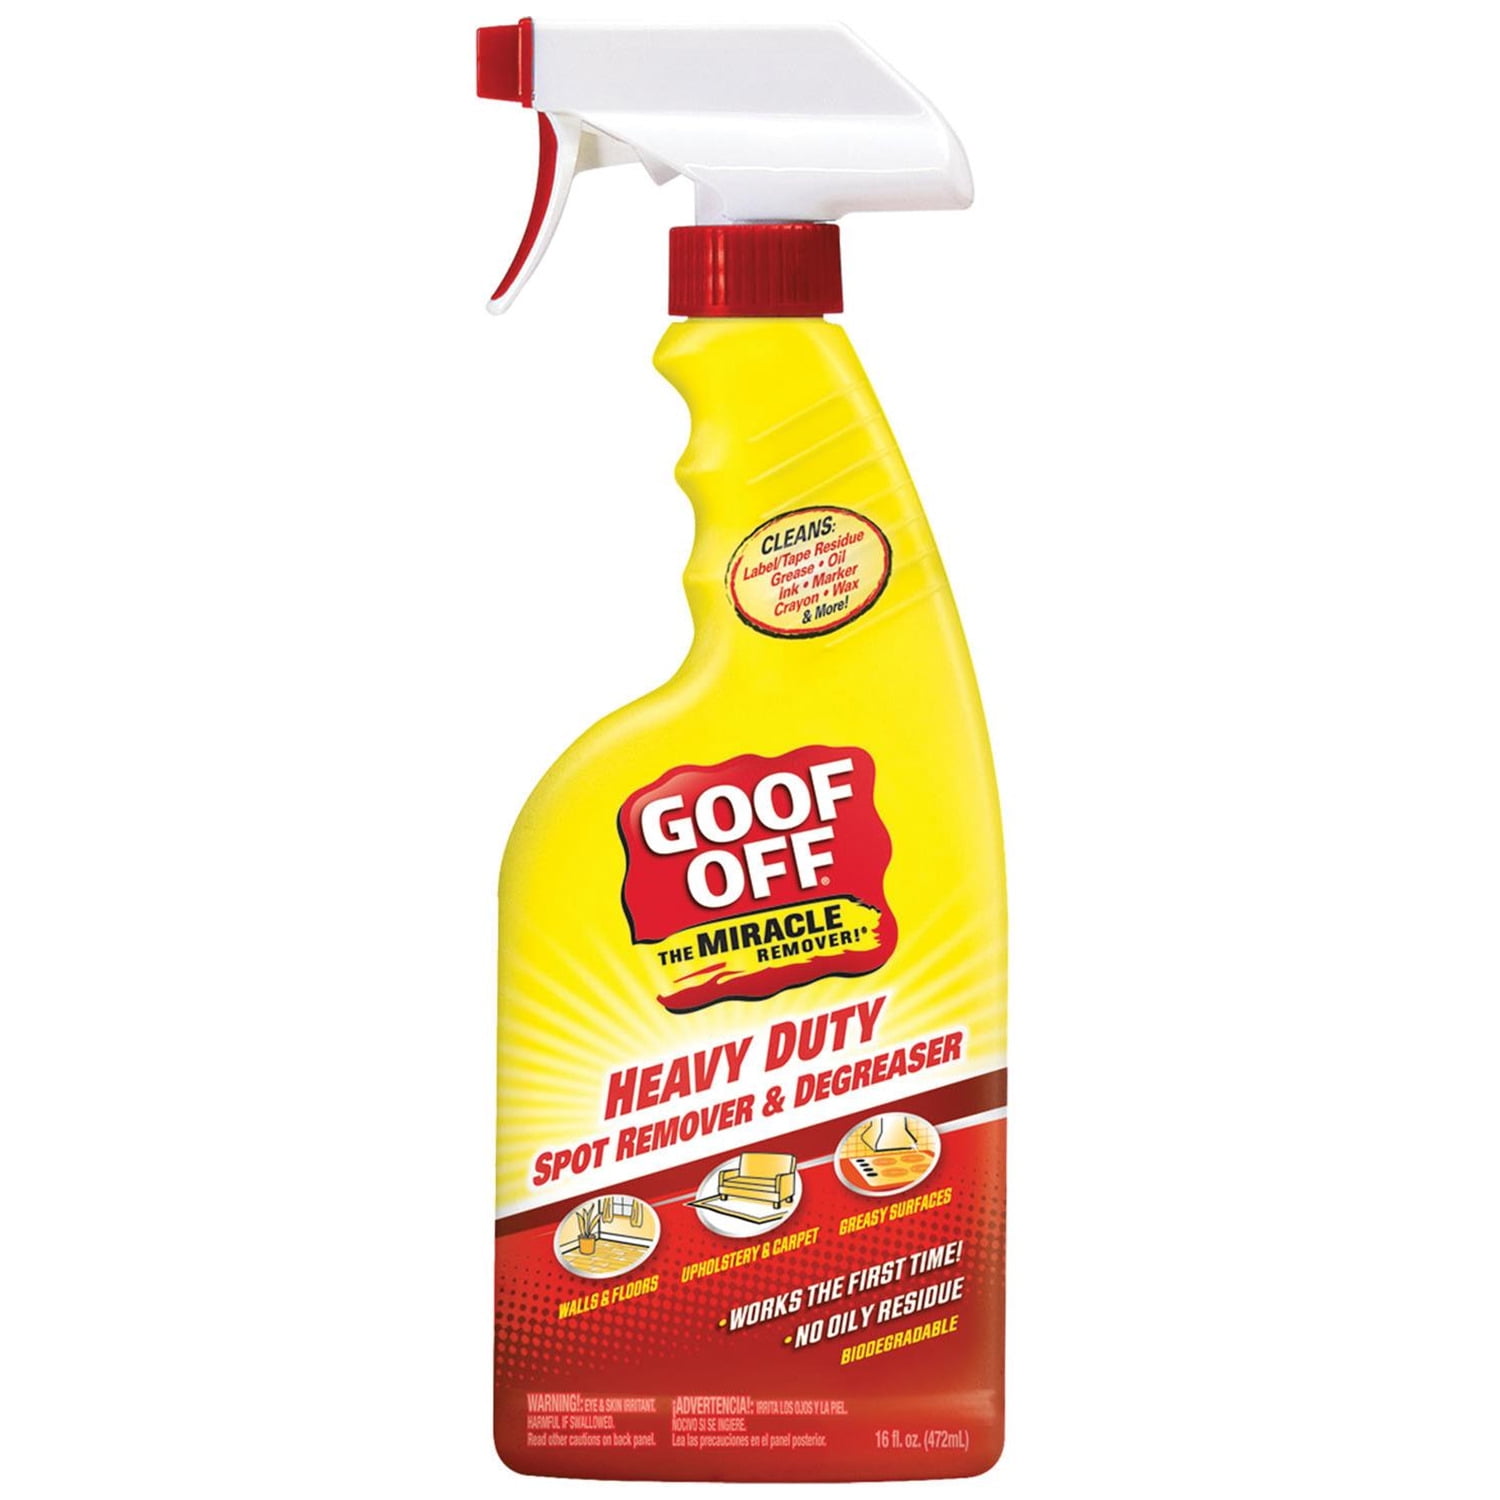 Goof Off - Household Heavy Duty Remover for Spots, Stains, Marks, & Messes  8 oz.